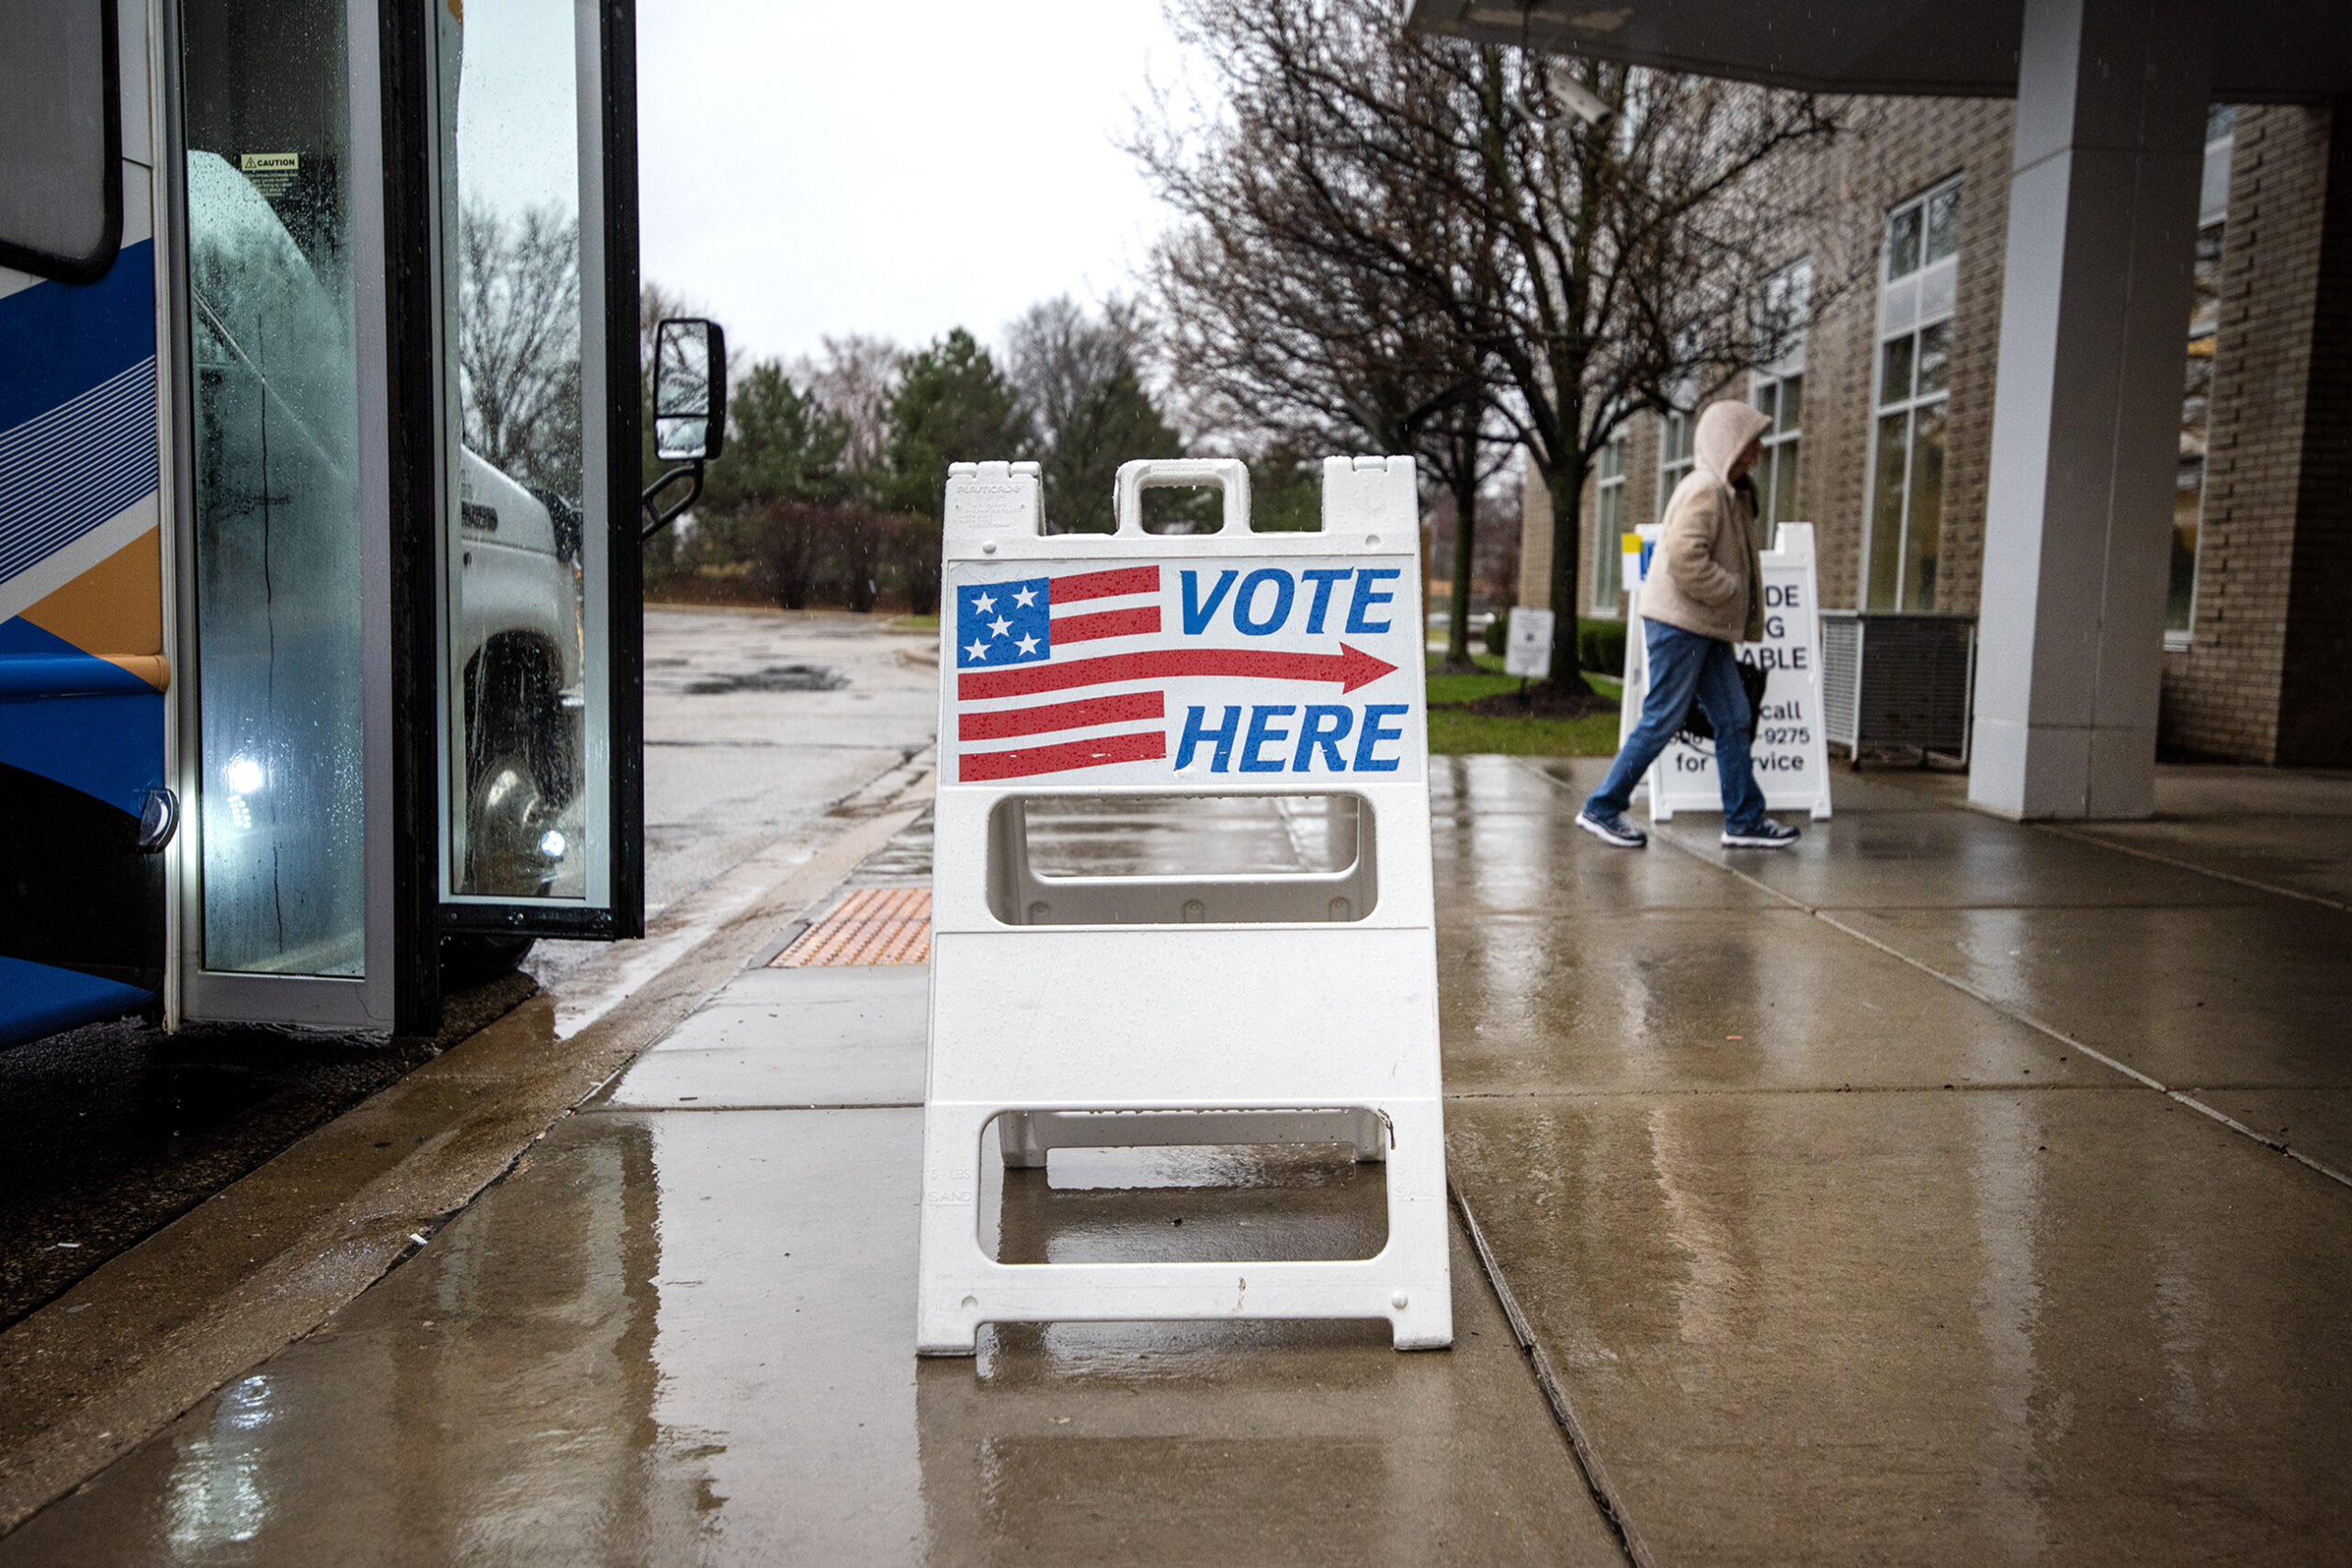 Racine County noticed ‘discrepancies’ in vote totals Tuesday, leading to delay of results